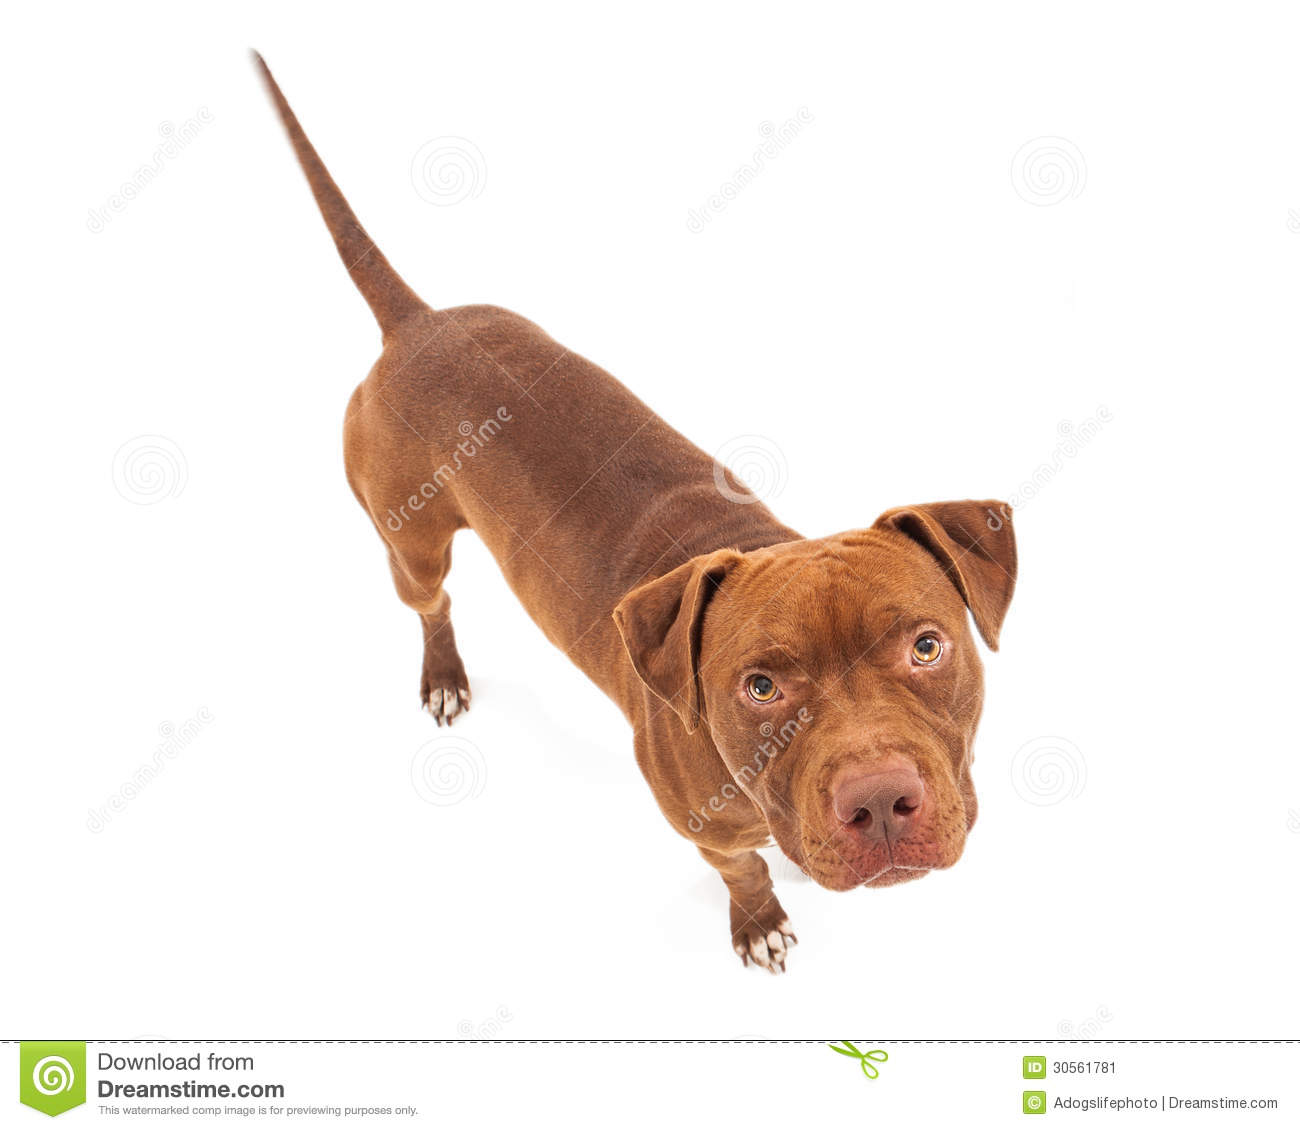 Pit Bull Dog With Red Coat Looking Up White Standing Against A White